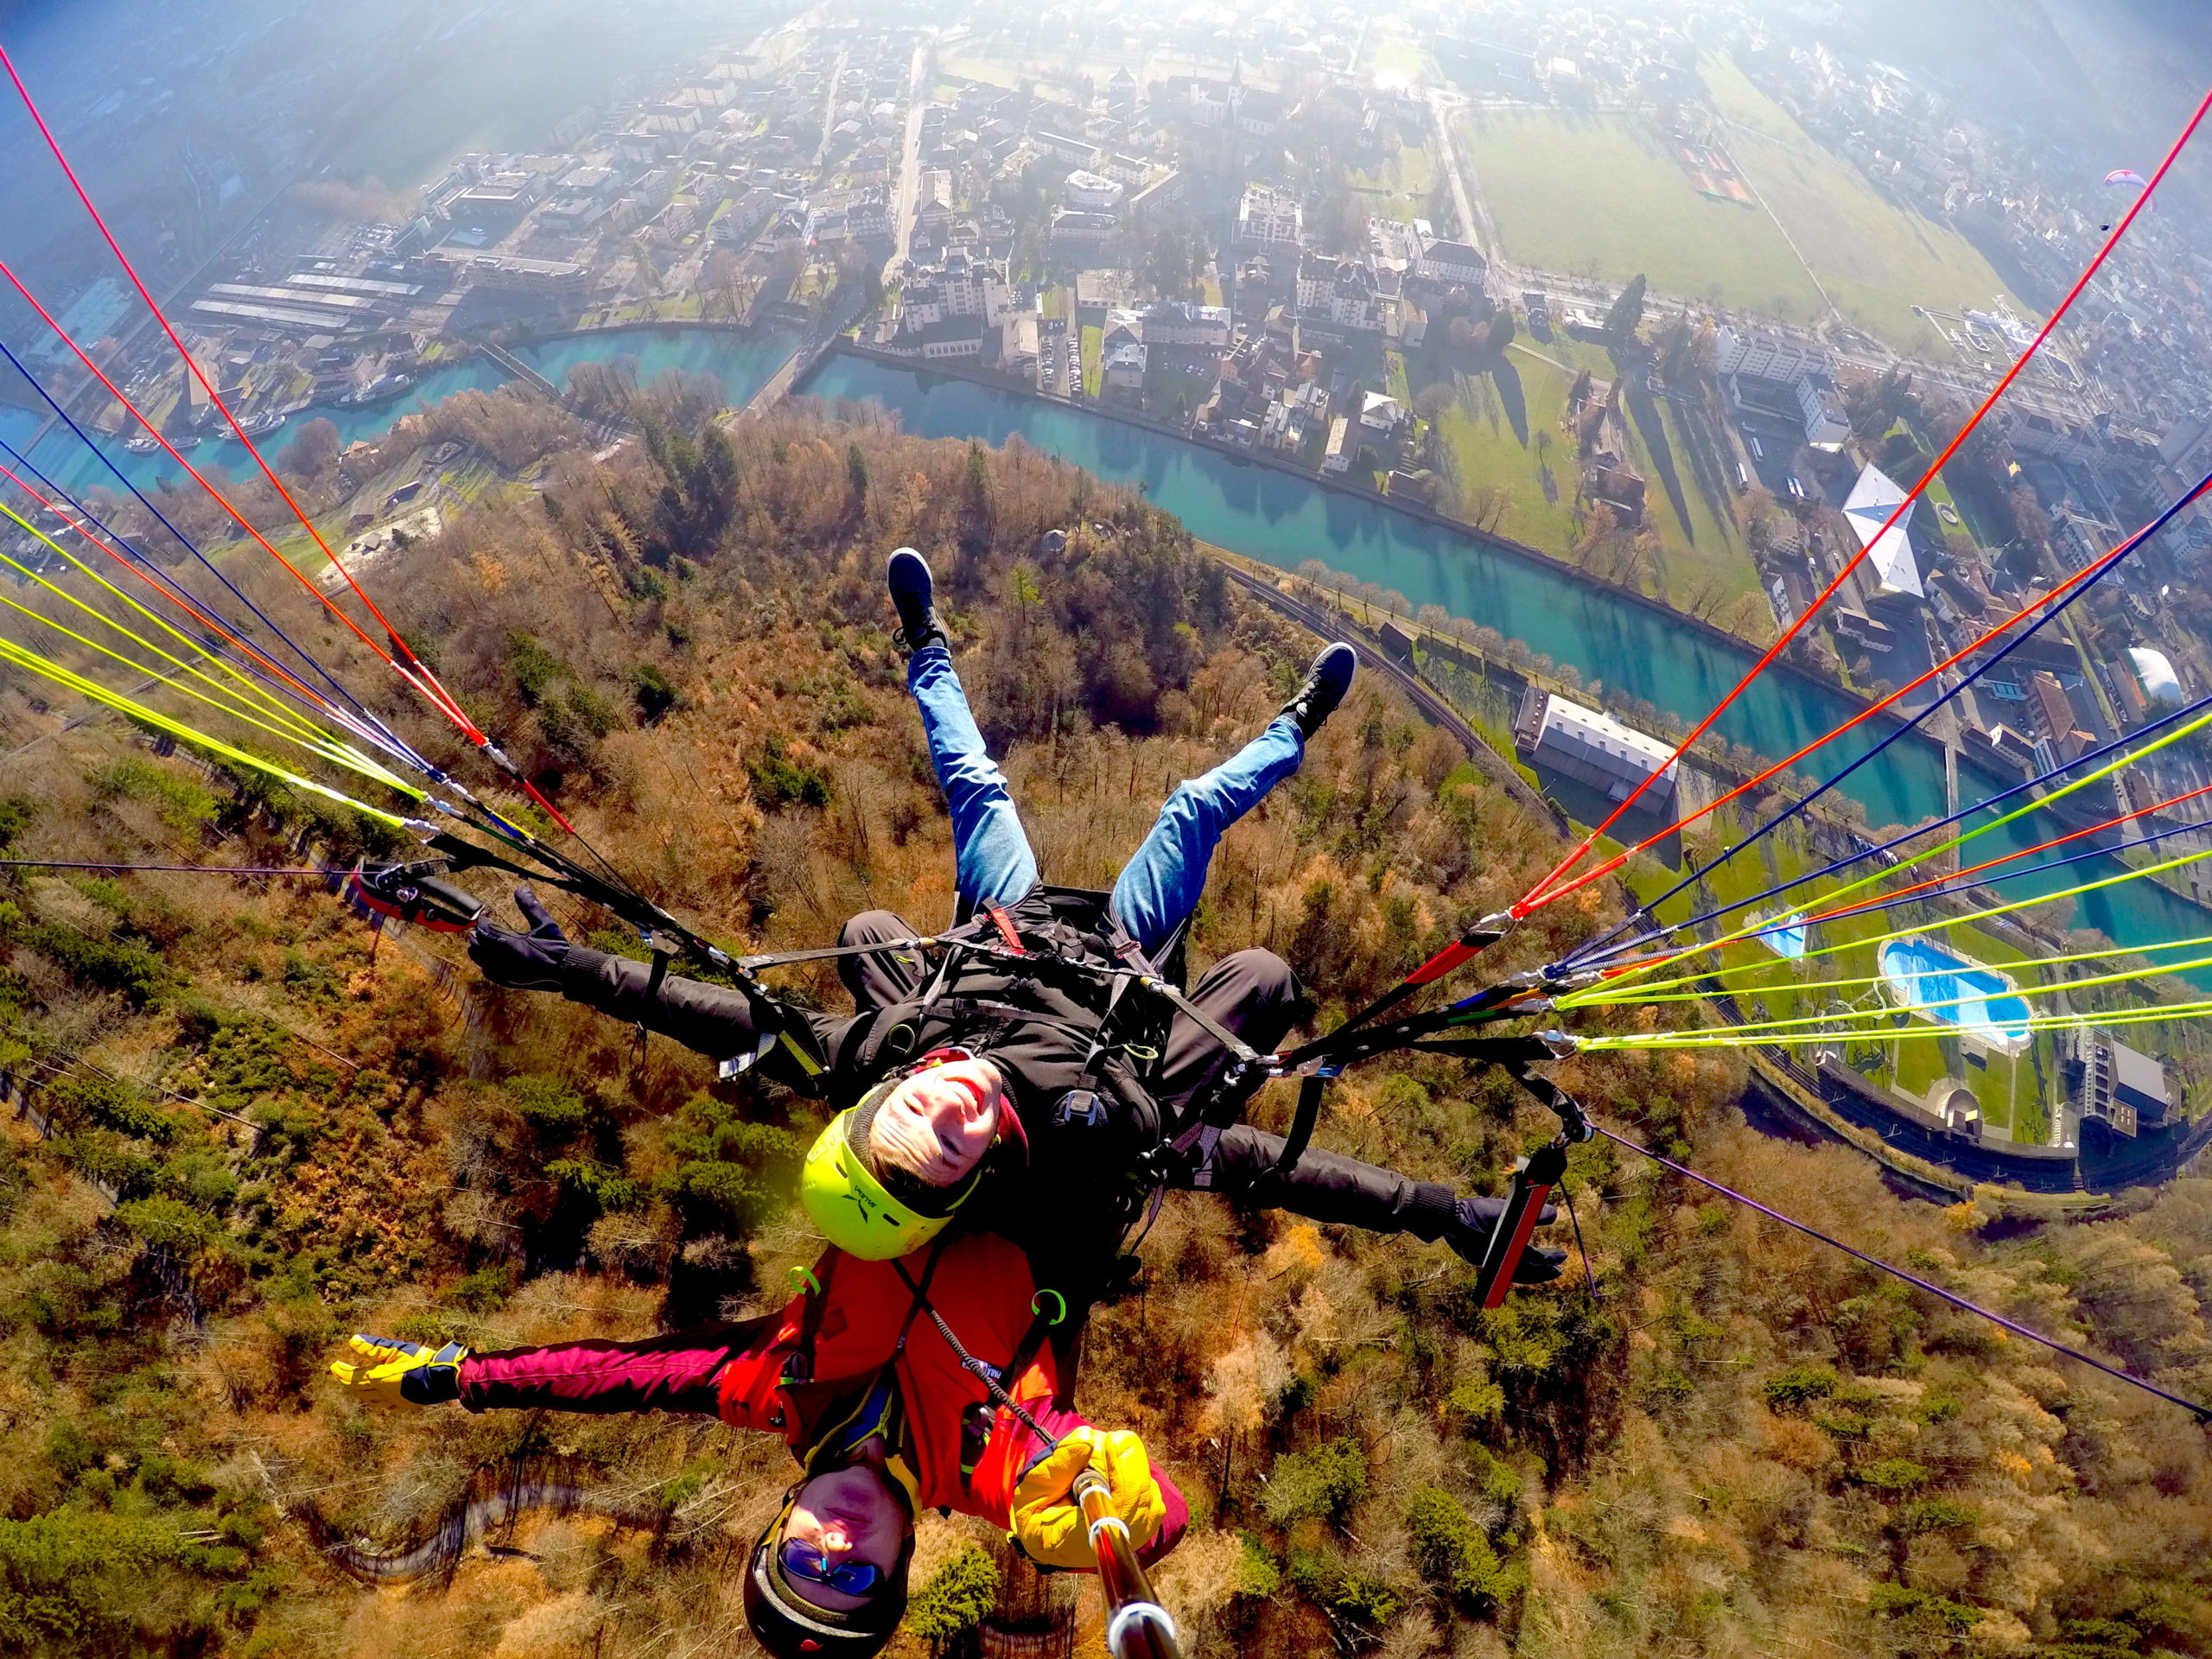 Third place, Most Epic Selfie: Jake Hartmann, Interlaken, Switzerland. “Free Fallin’: This photo was taken while I was paragliding above the city of Interlaken, Switzerland. The canal below connects Lake Brienz and Lake Thun, the two lakes that surround the town. From this height there was also an amazing view of the Bernese Alps!”